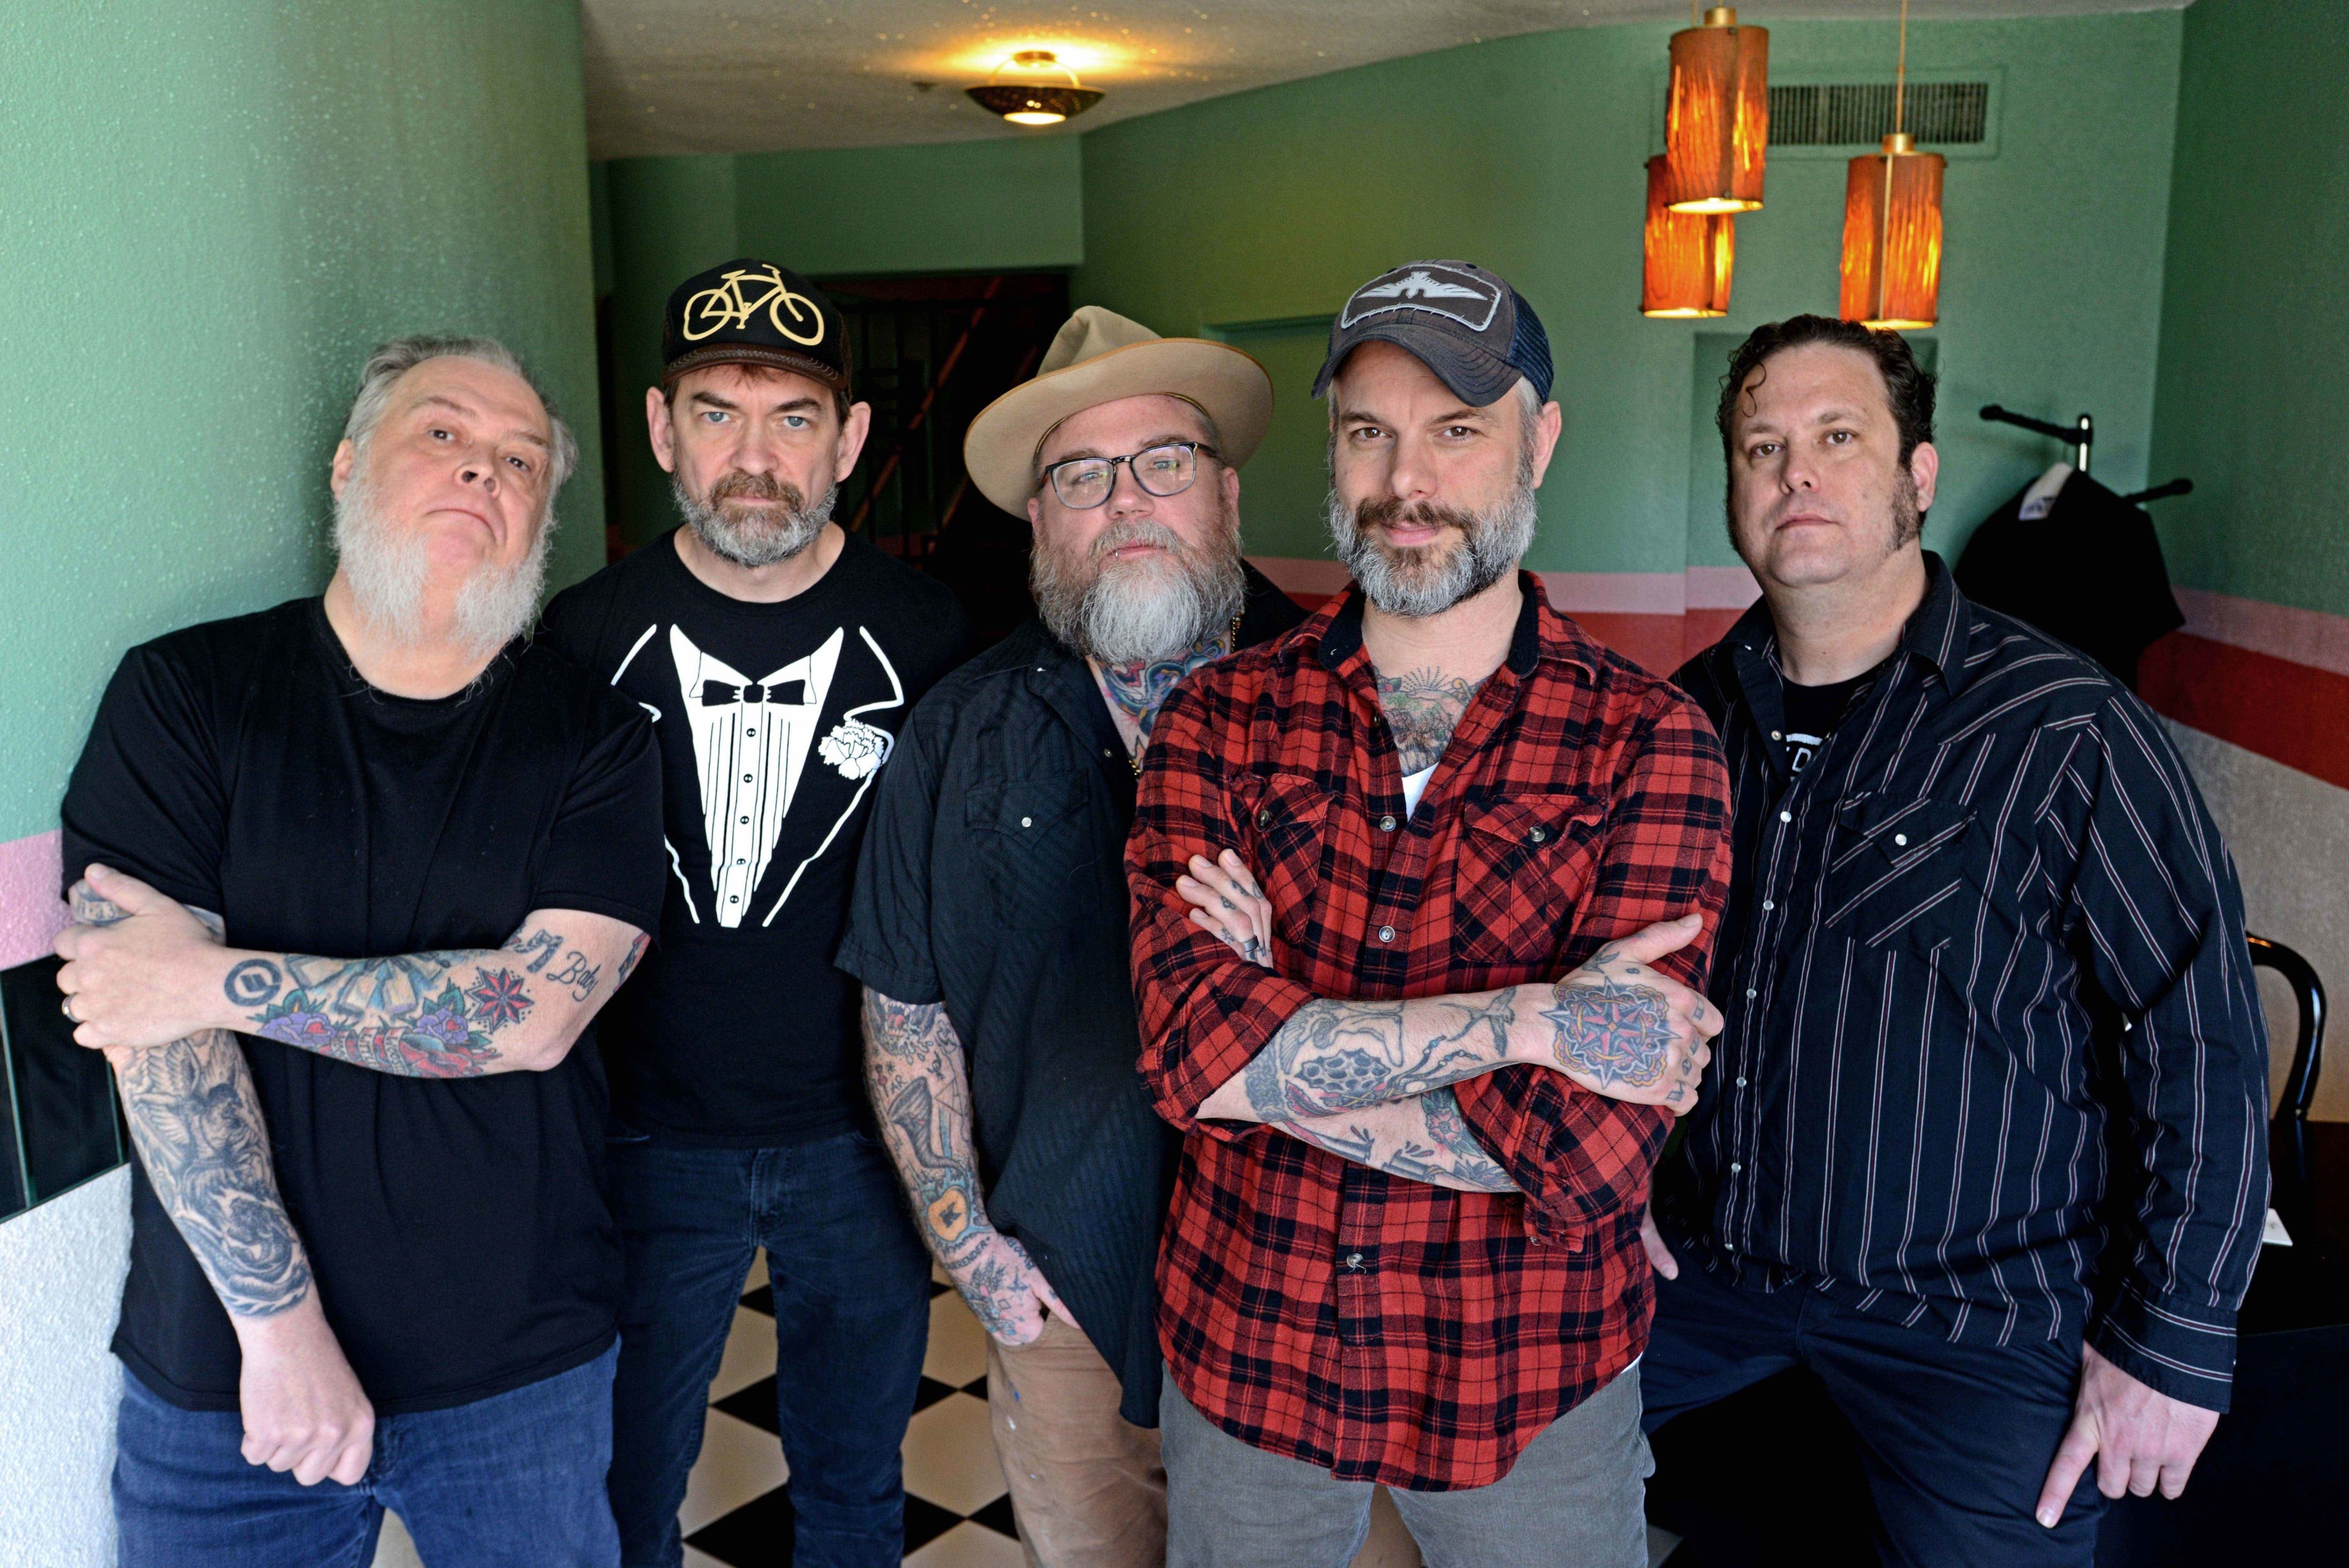 Lucero Channel Butch Cassidy In New Song “Cover Me”